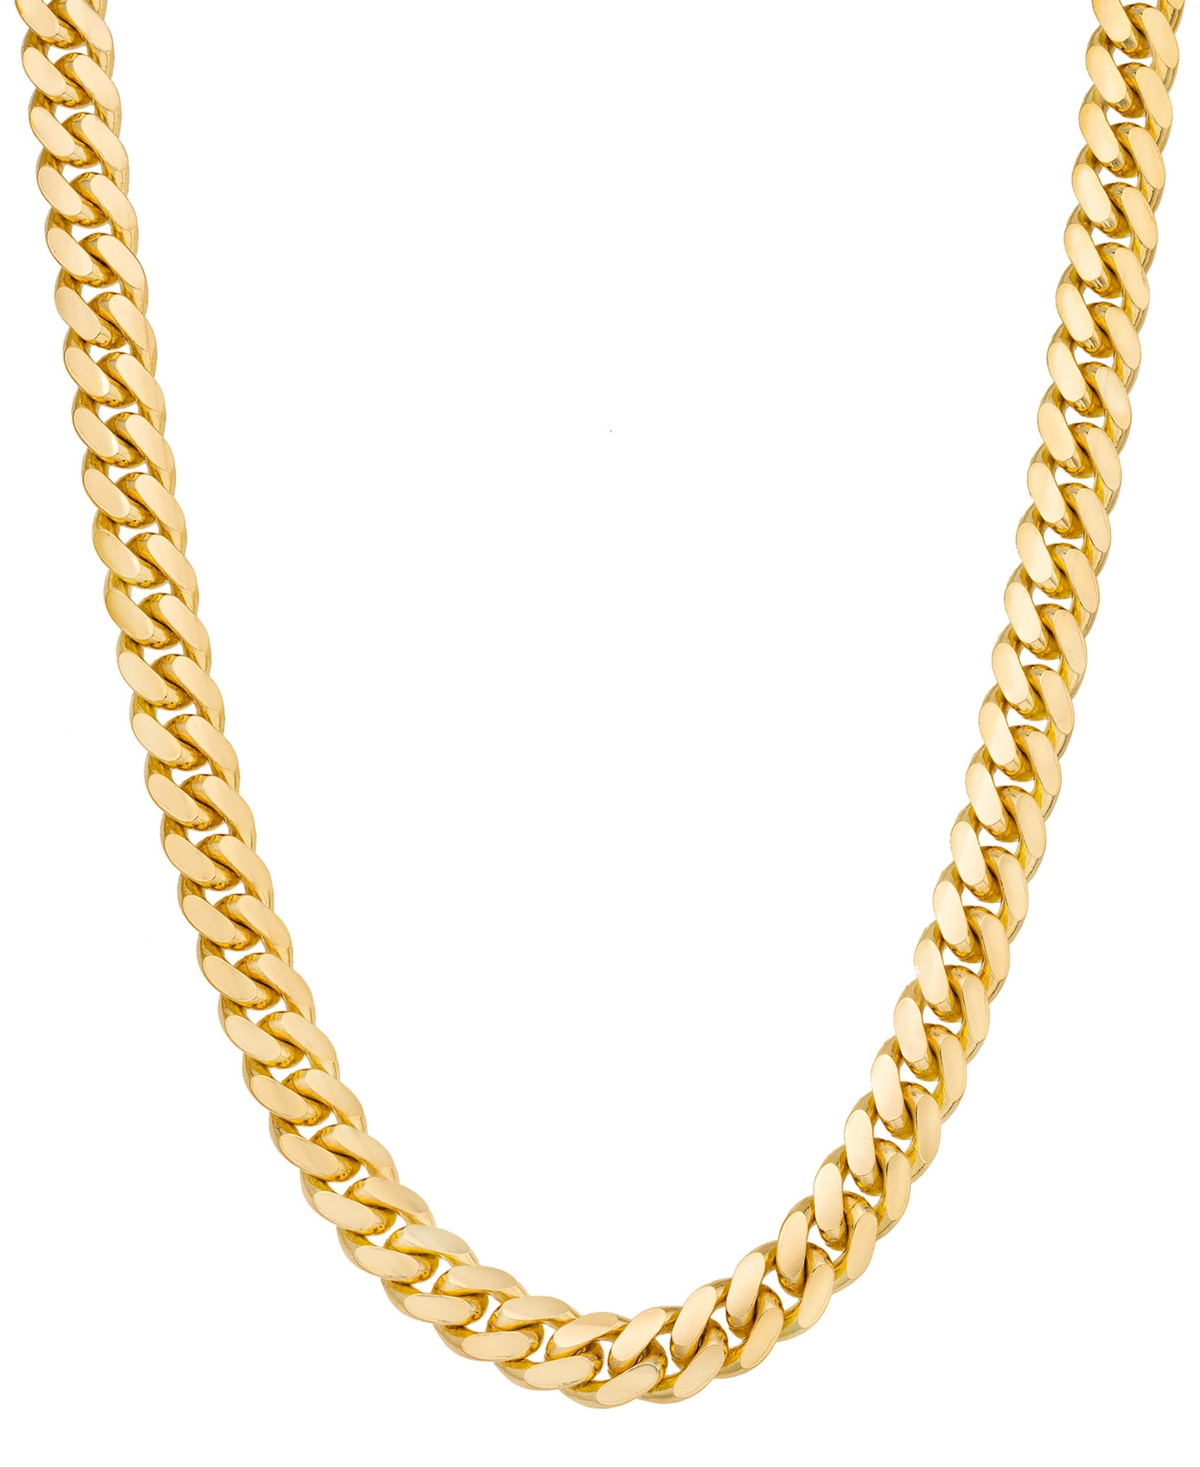 Men's Solid Cuban Link 24" Chain Necklace in 14k Gold-Plated Sterling Silver - Gold Over Silver